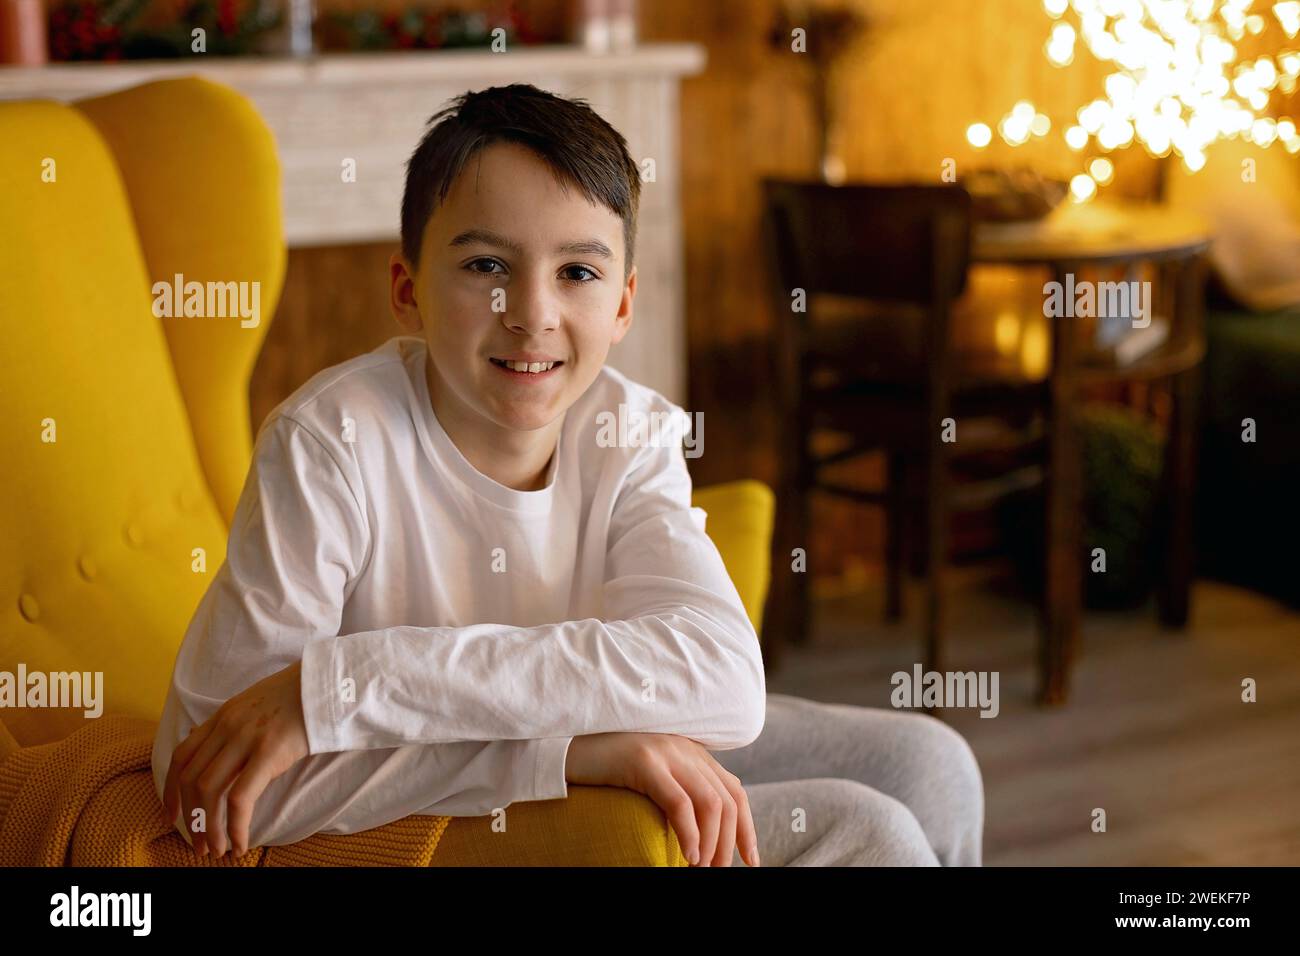 Teenage child, boy, sitting in cozy armchair at home, smiling at camera Stock Photo